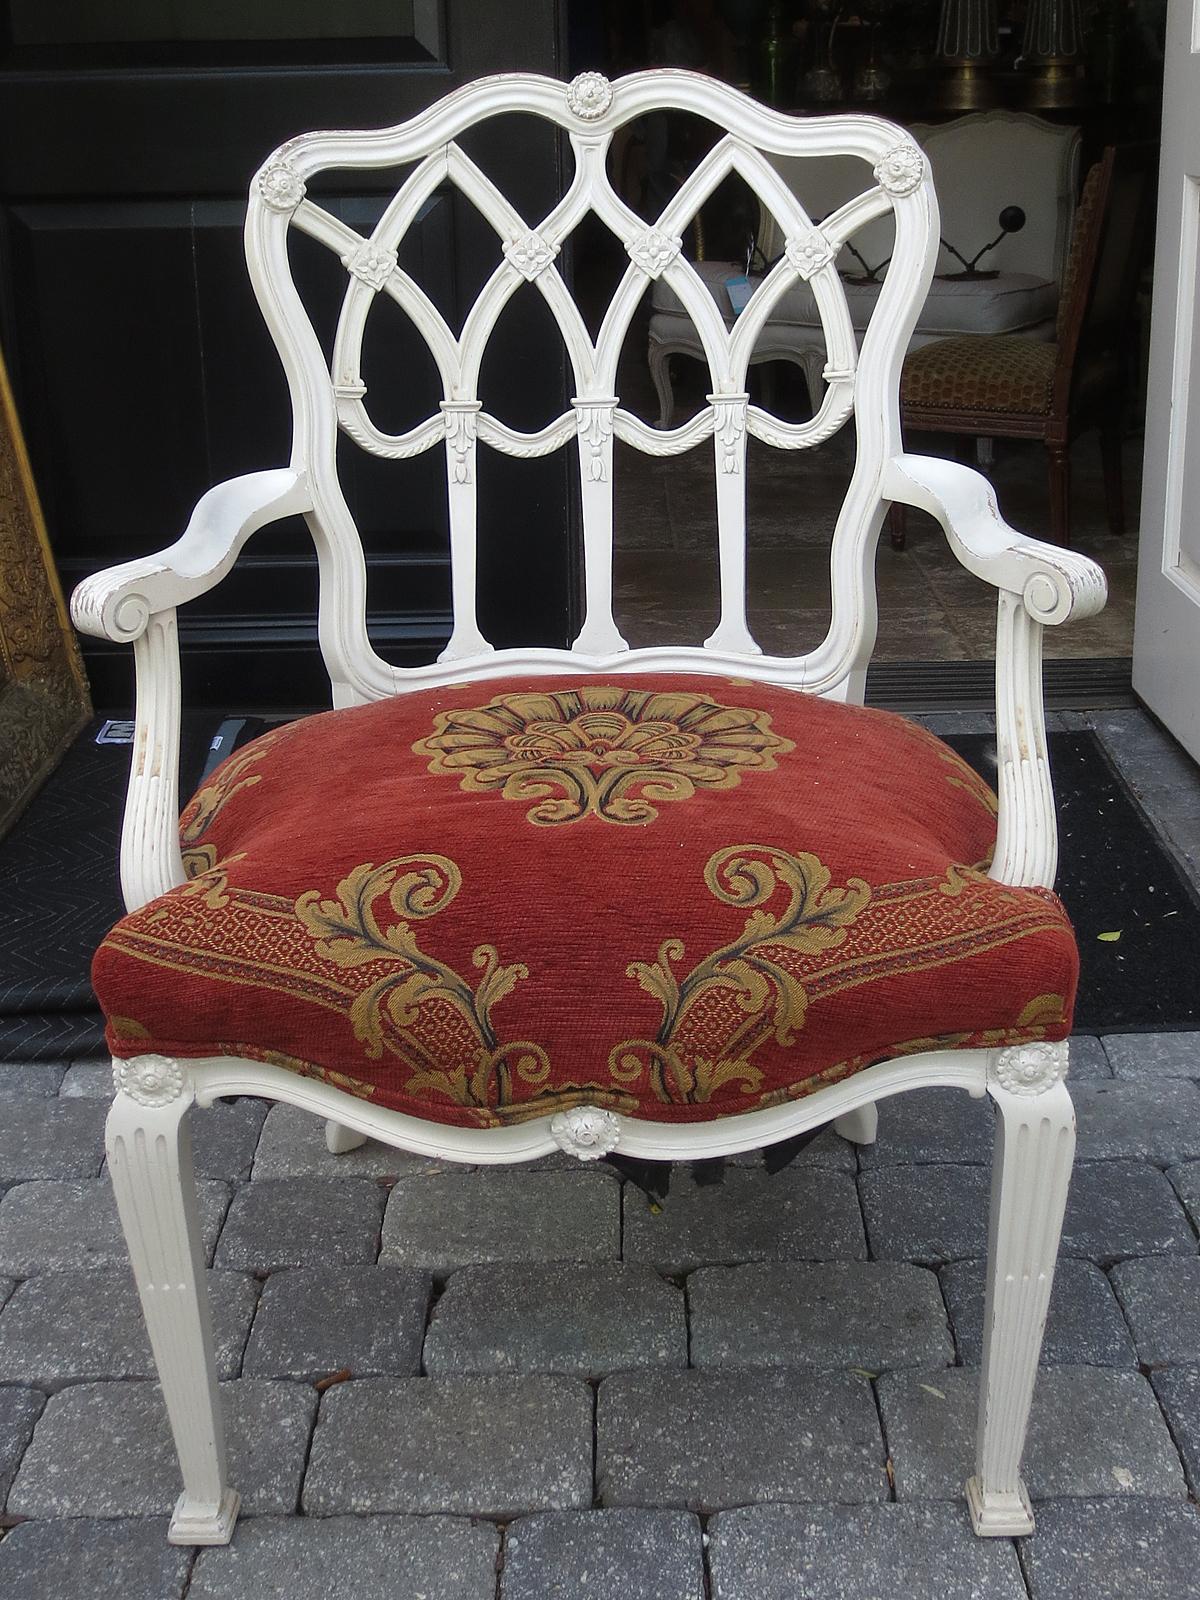 Early 20th century English style painted armchair.